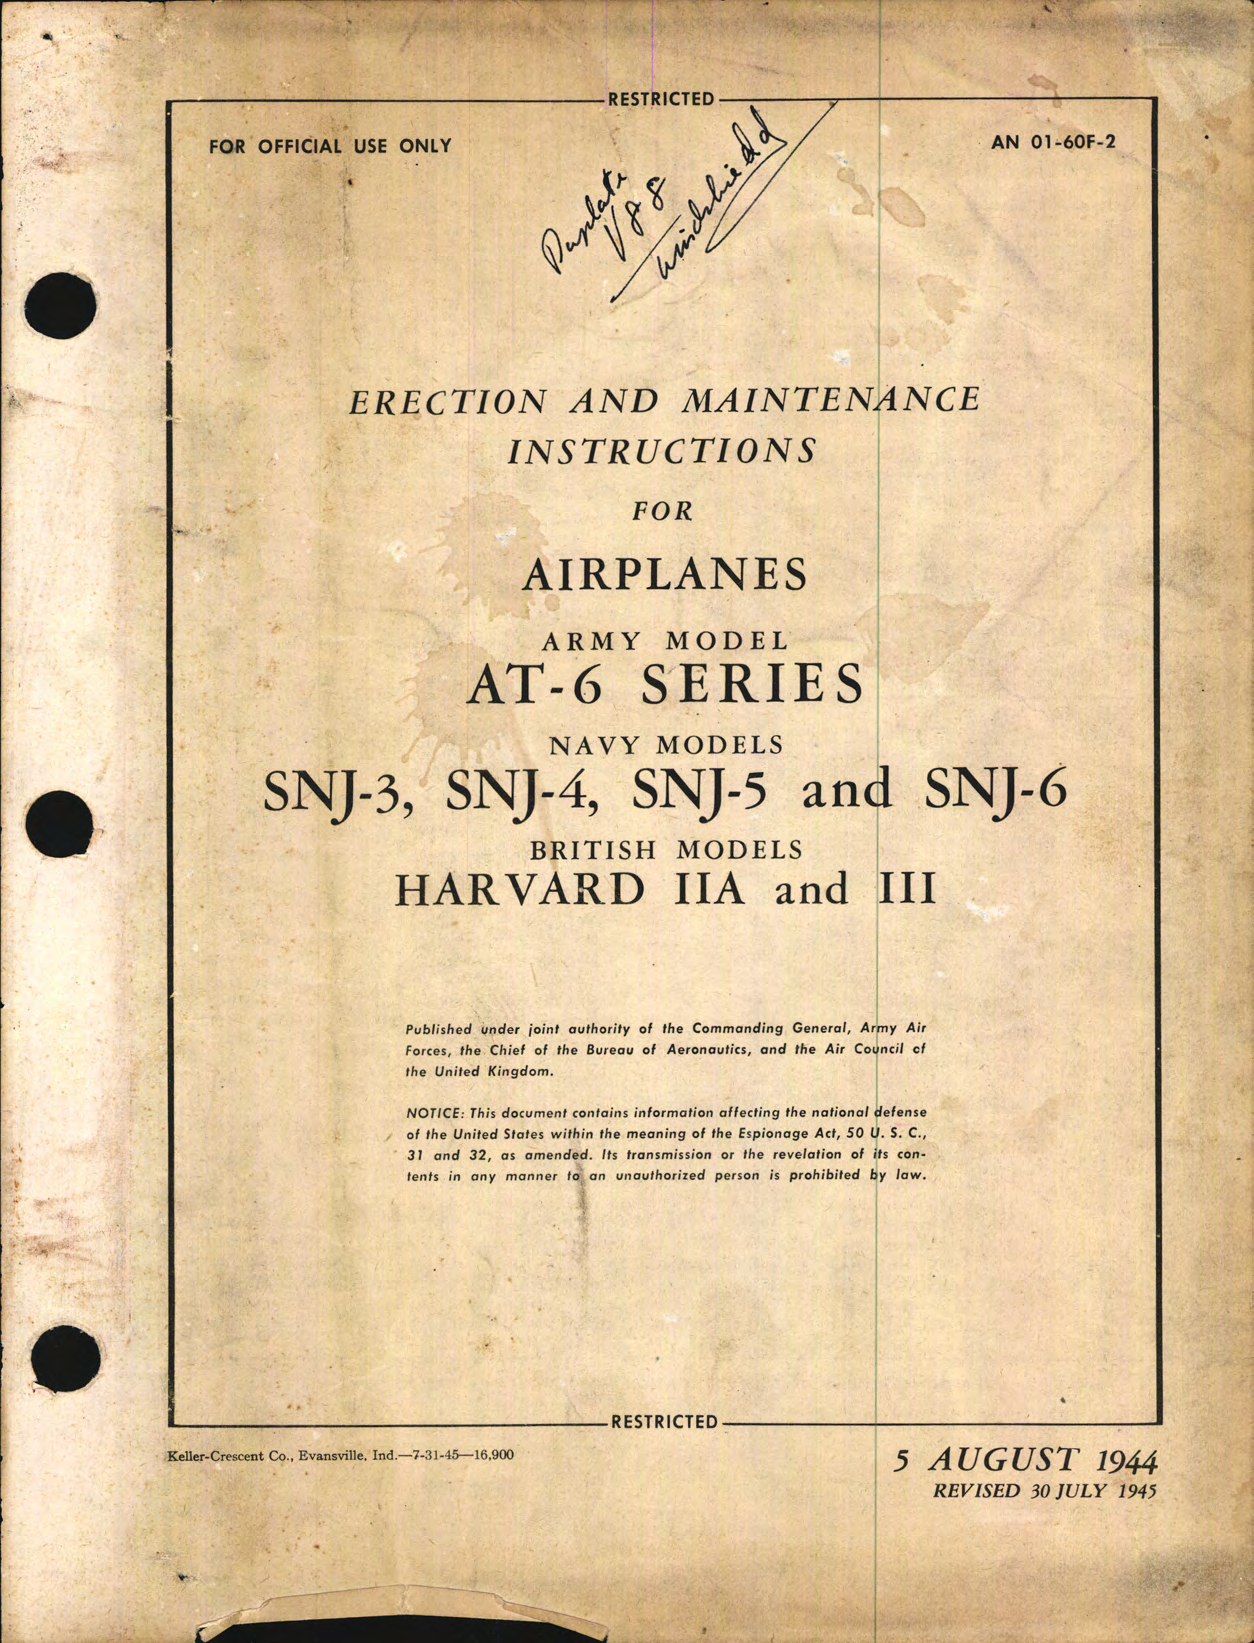 Sample page 1 from AirCorps Library document: Erection & Maintenance Instructions for AT-6, SNJ-3, SNJ-, SNJ-5, and SNJ-6 (Harvard IIA and III)